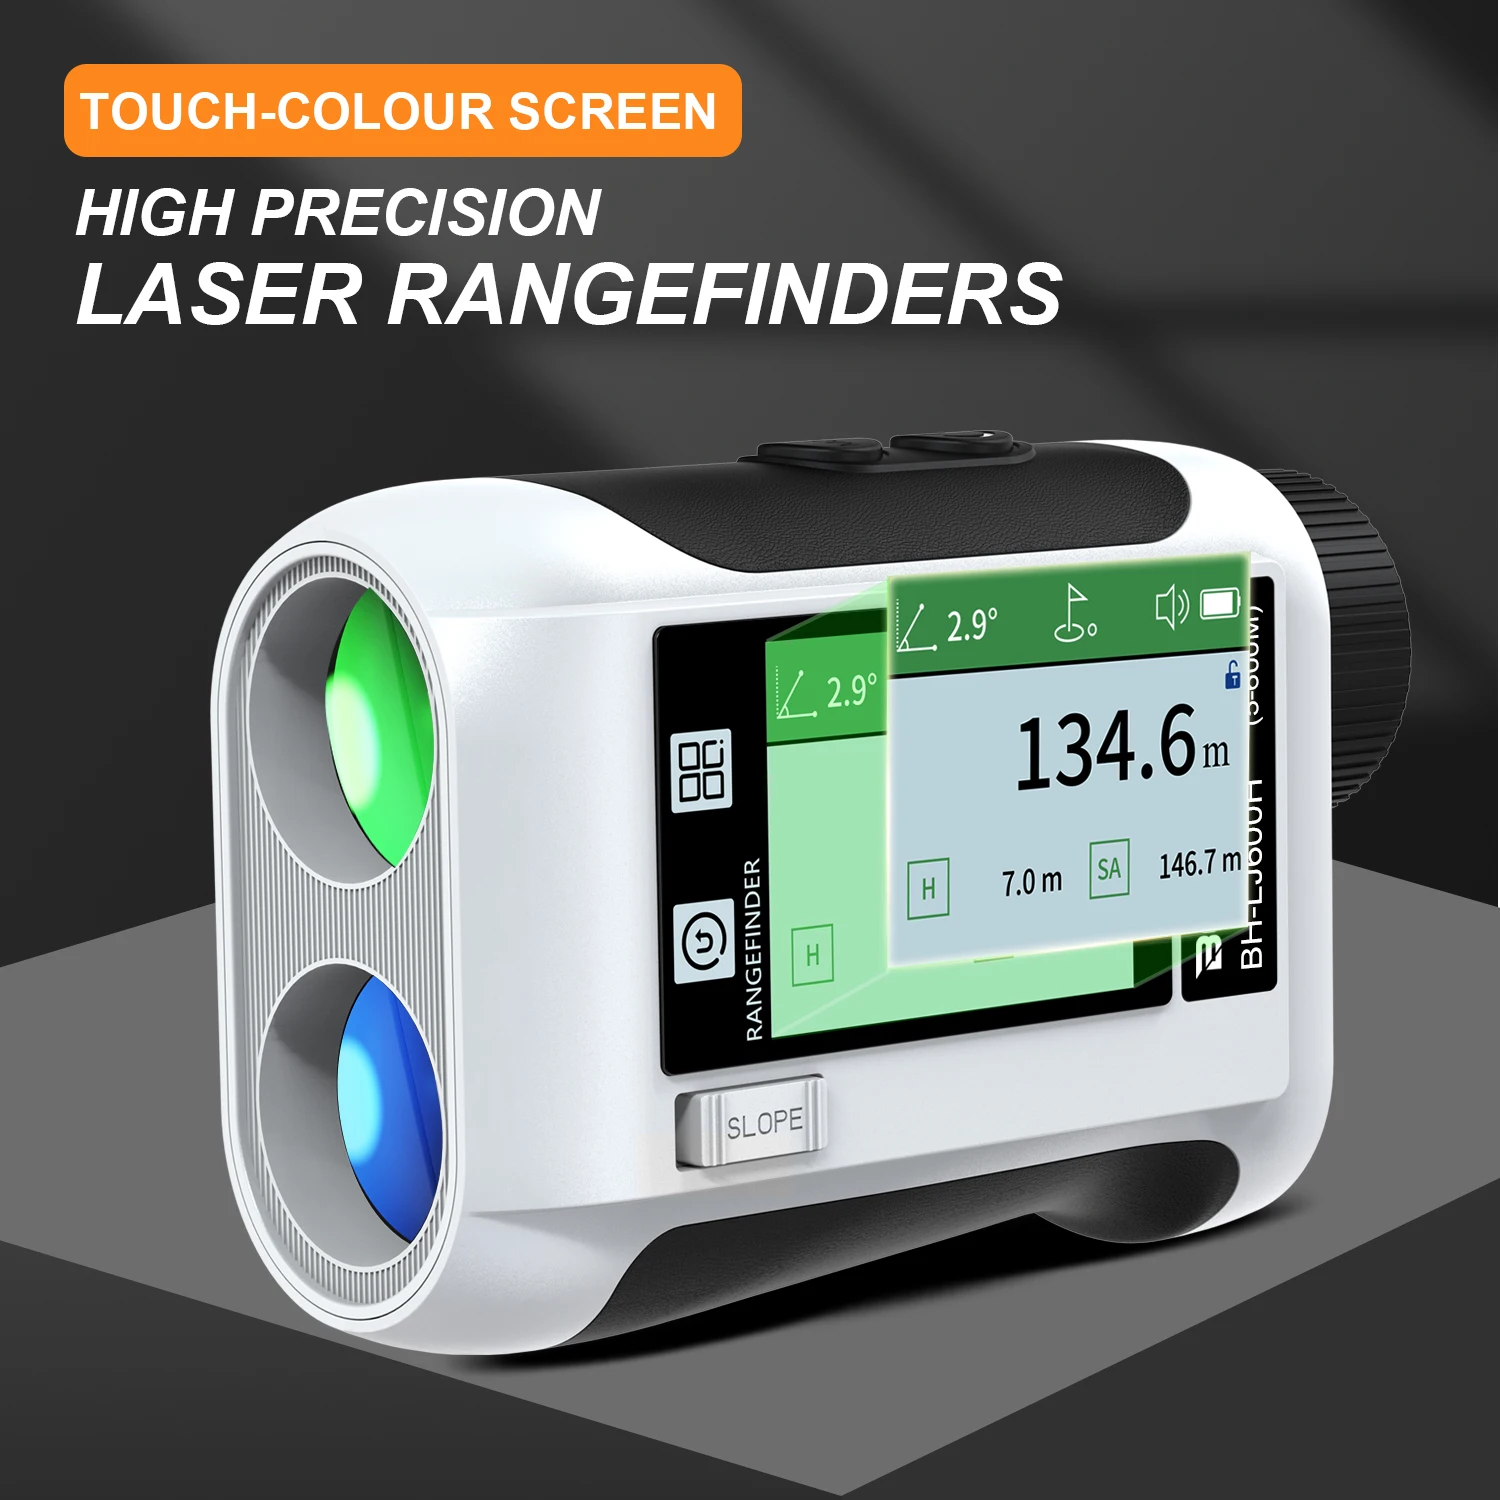 

Borhold 600M-1500M Laser Rangefinder Touch color Screen Golf Rangefinder Flagpole vibration with slope Switch voice broadcast